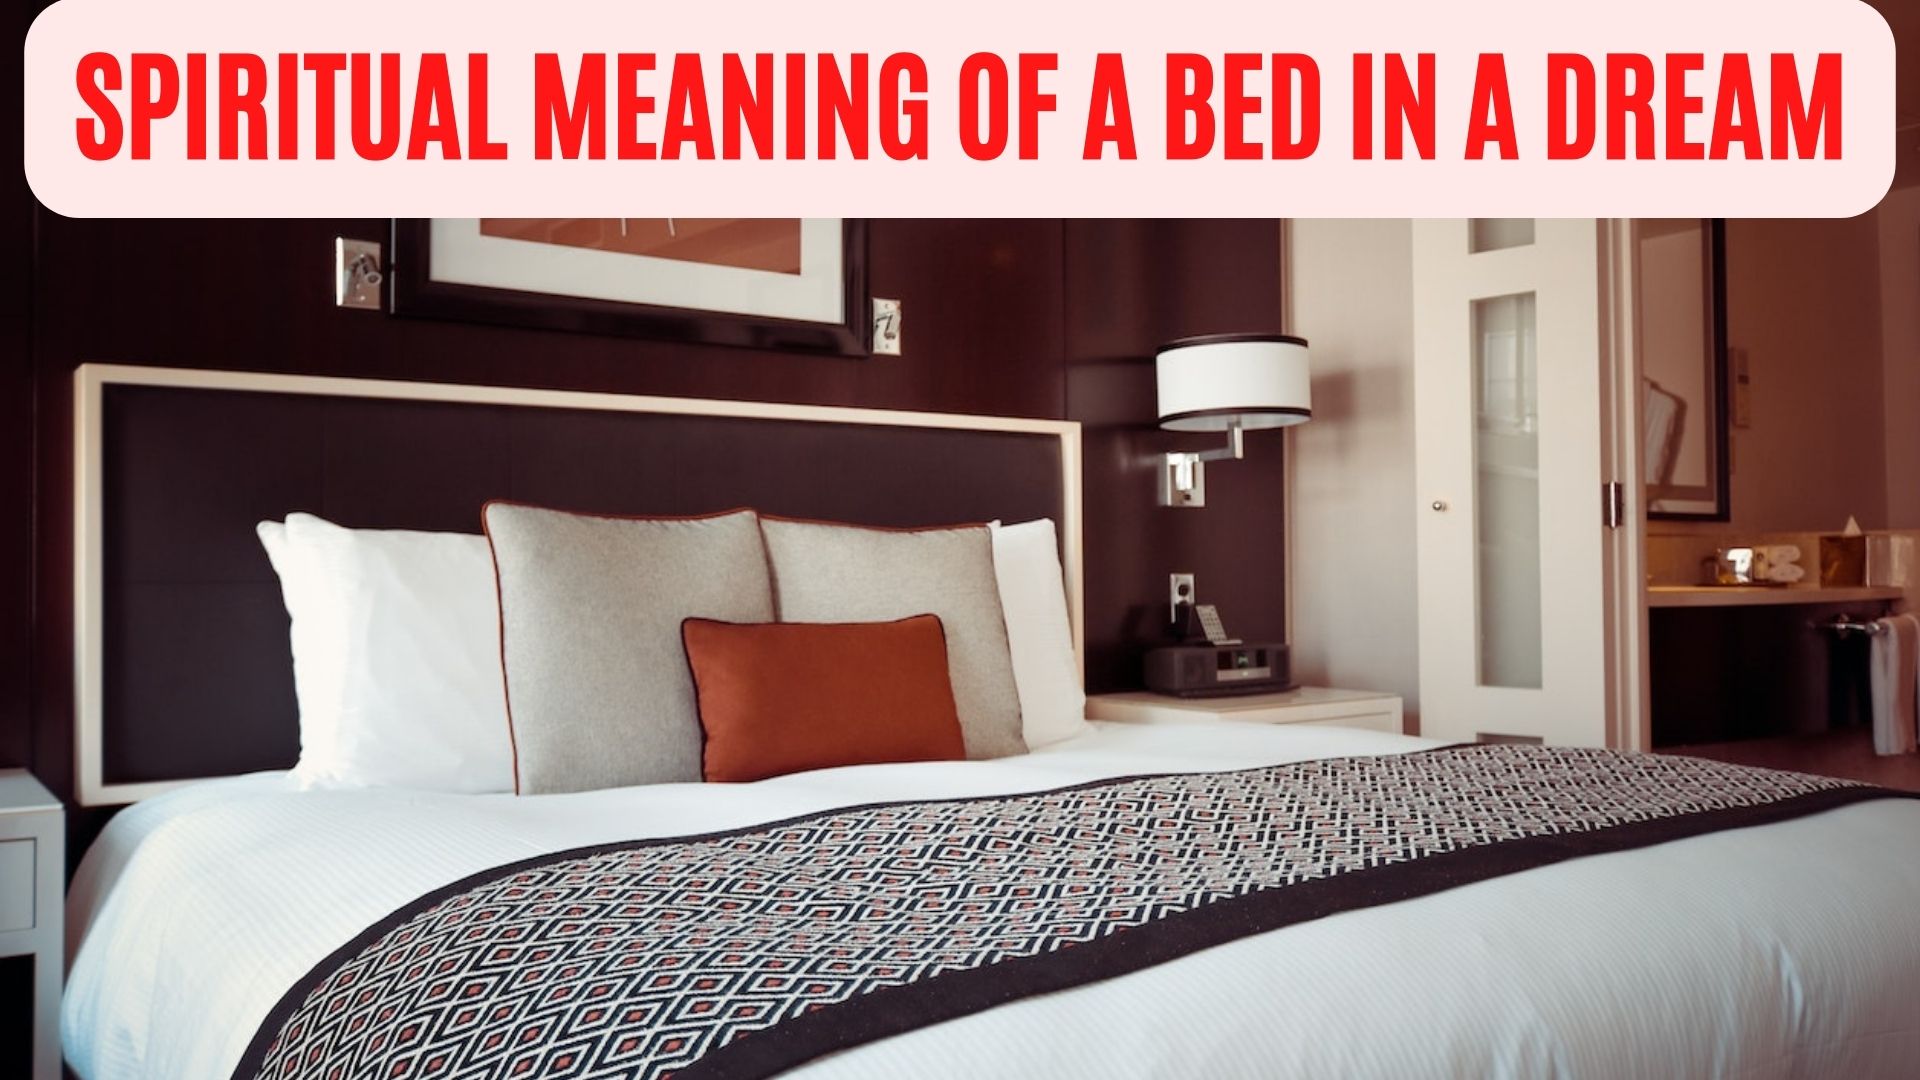 Spiritual Meaning Of A Bed In A Dream - A Symbol Of Privacy, Intimacy, And Connection